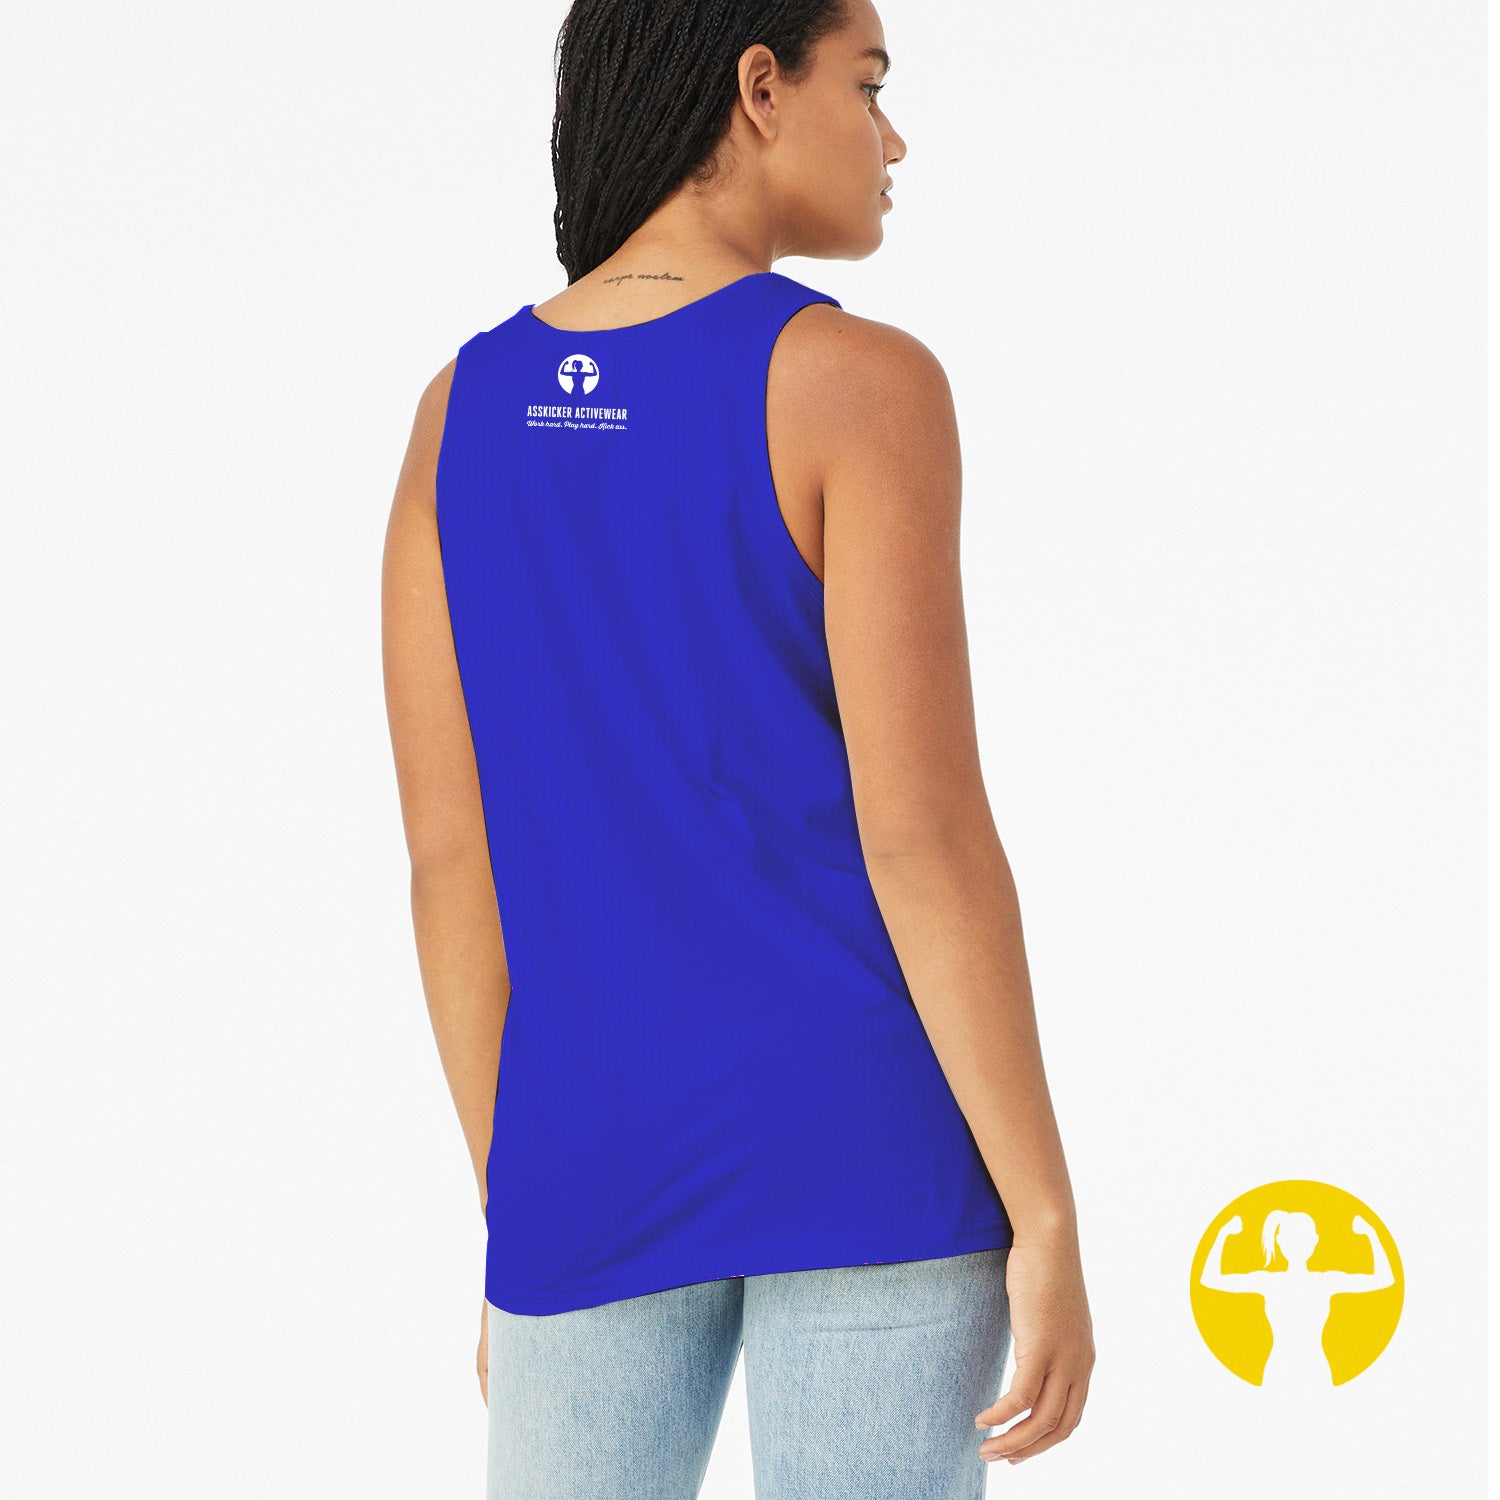 My imperfections are perfect. Choose from our most popular sayings! This modernized unisex jersey tank offers a contemporary fit, showcasing a rounded neckline and crafted from superior combed and ring-spun cotton. Features: Side-seamed. Contemporary fit. Unisex sizing.